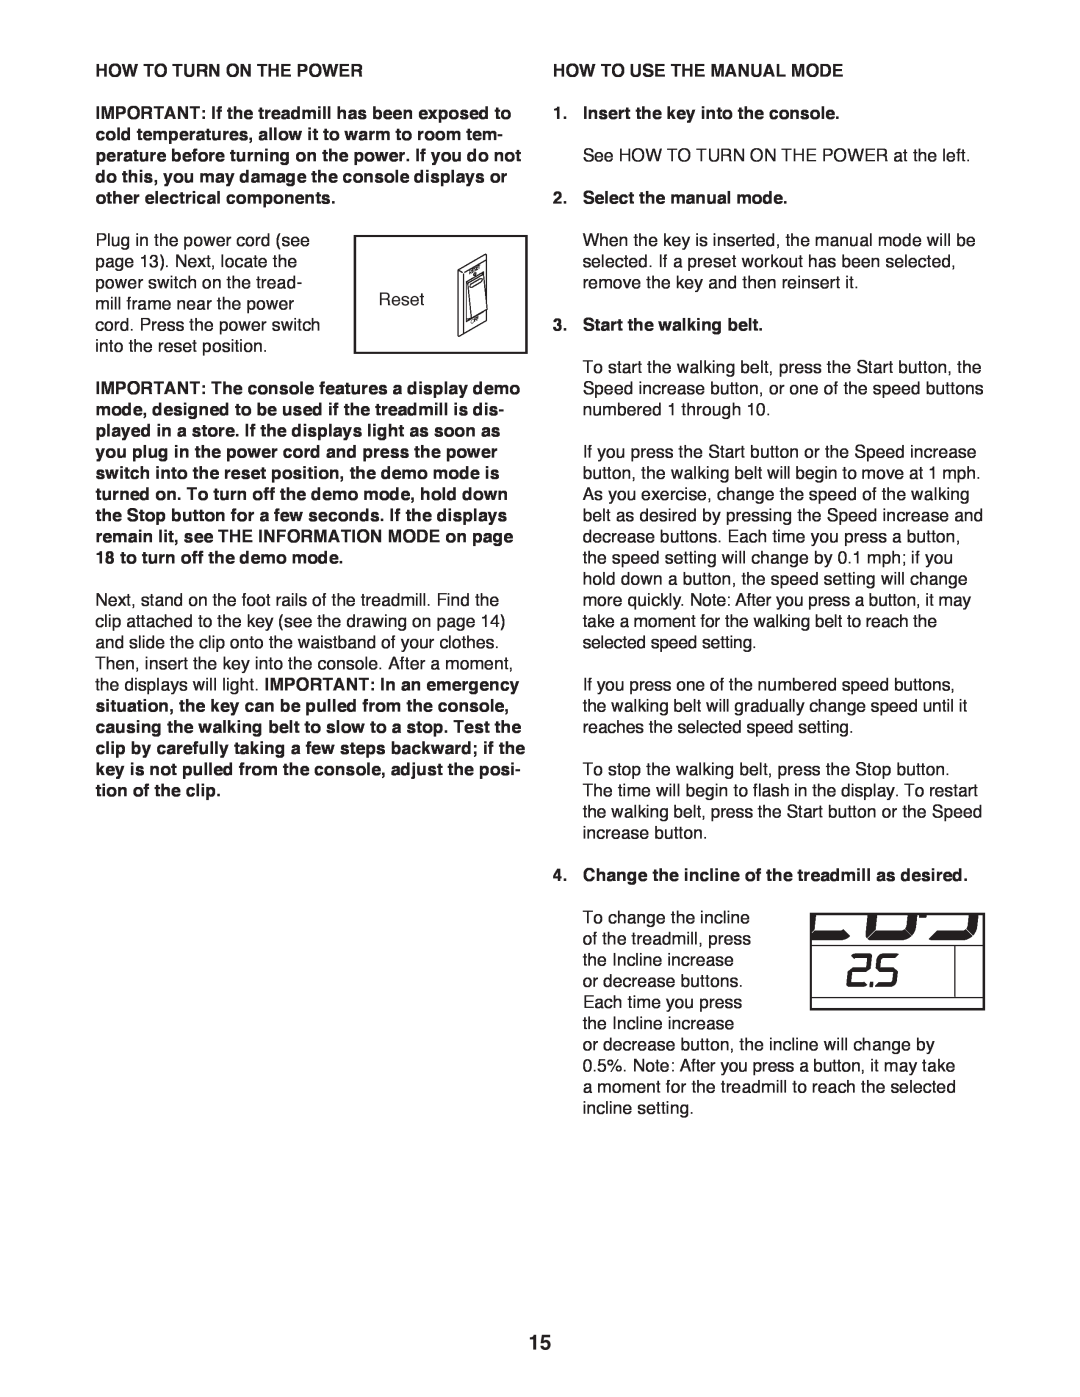 Weslo WLTL39312.0 user manual How To Turn On The Power, HOW TO USE THE MANUAL MODE 1. Insert the key into the console 